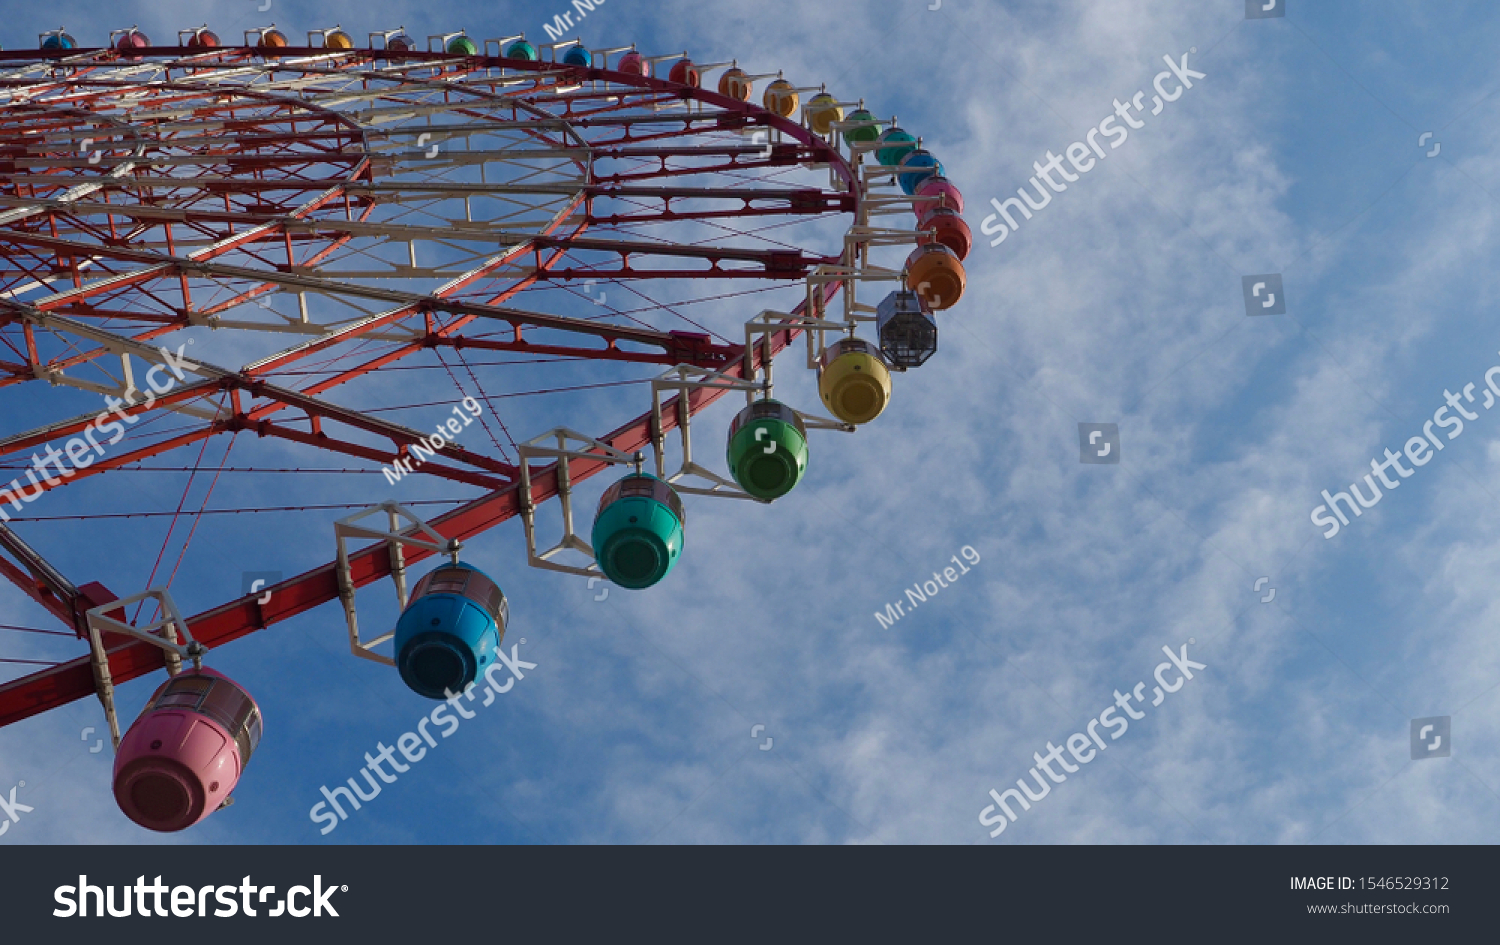 Looking upward to the colorful Ferris wheel in blue sky. #1546529312